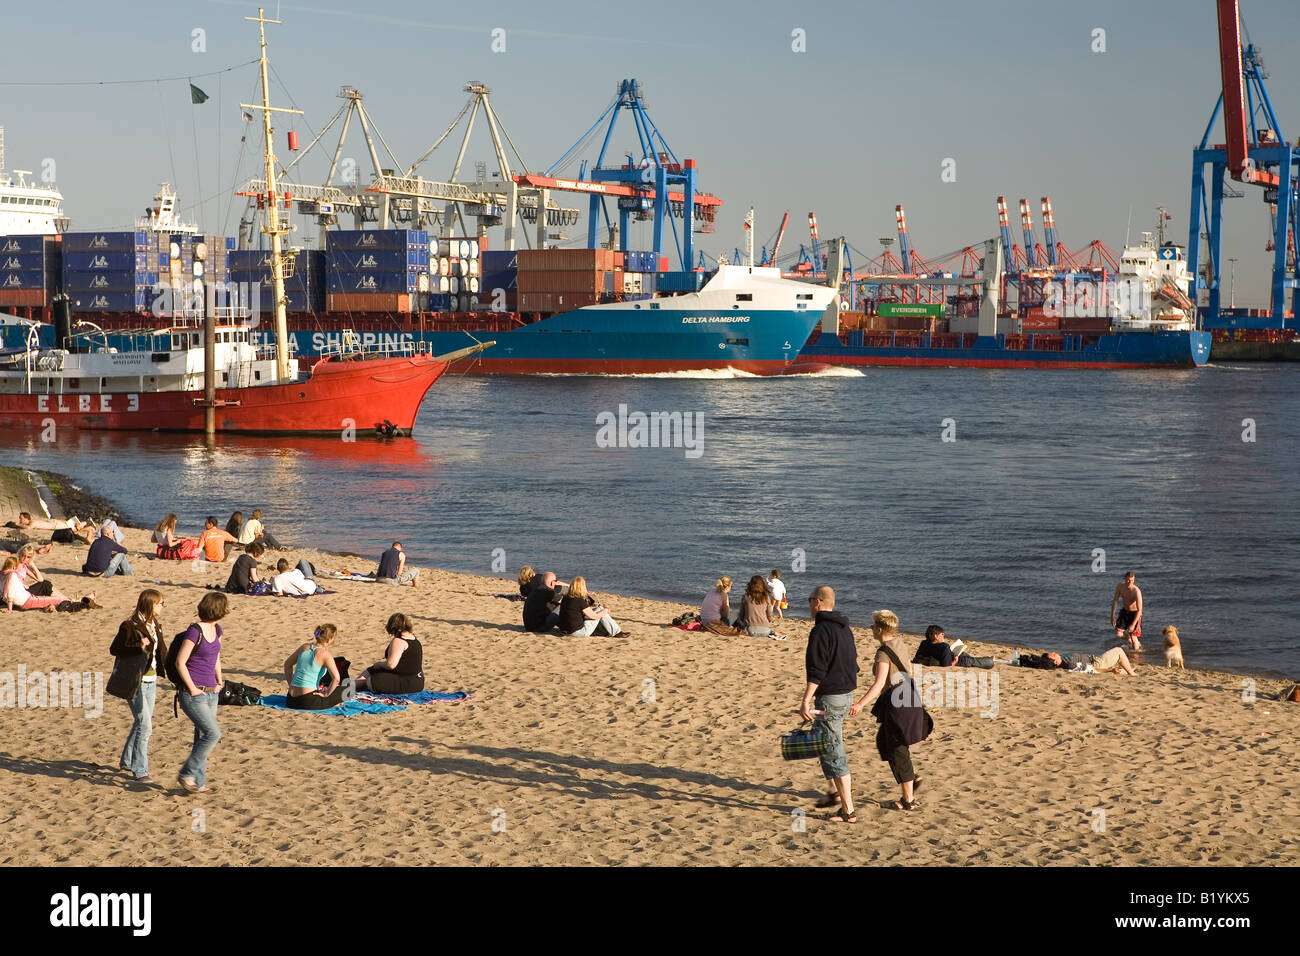 Beach of the Elbe in Oevelgoenne opposite the cranes at Burchard quay in Hamburg Stock Photo